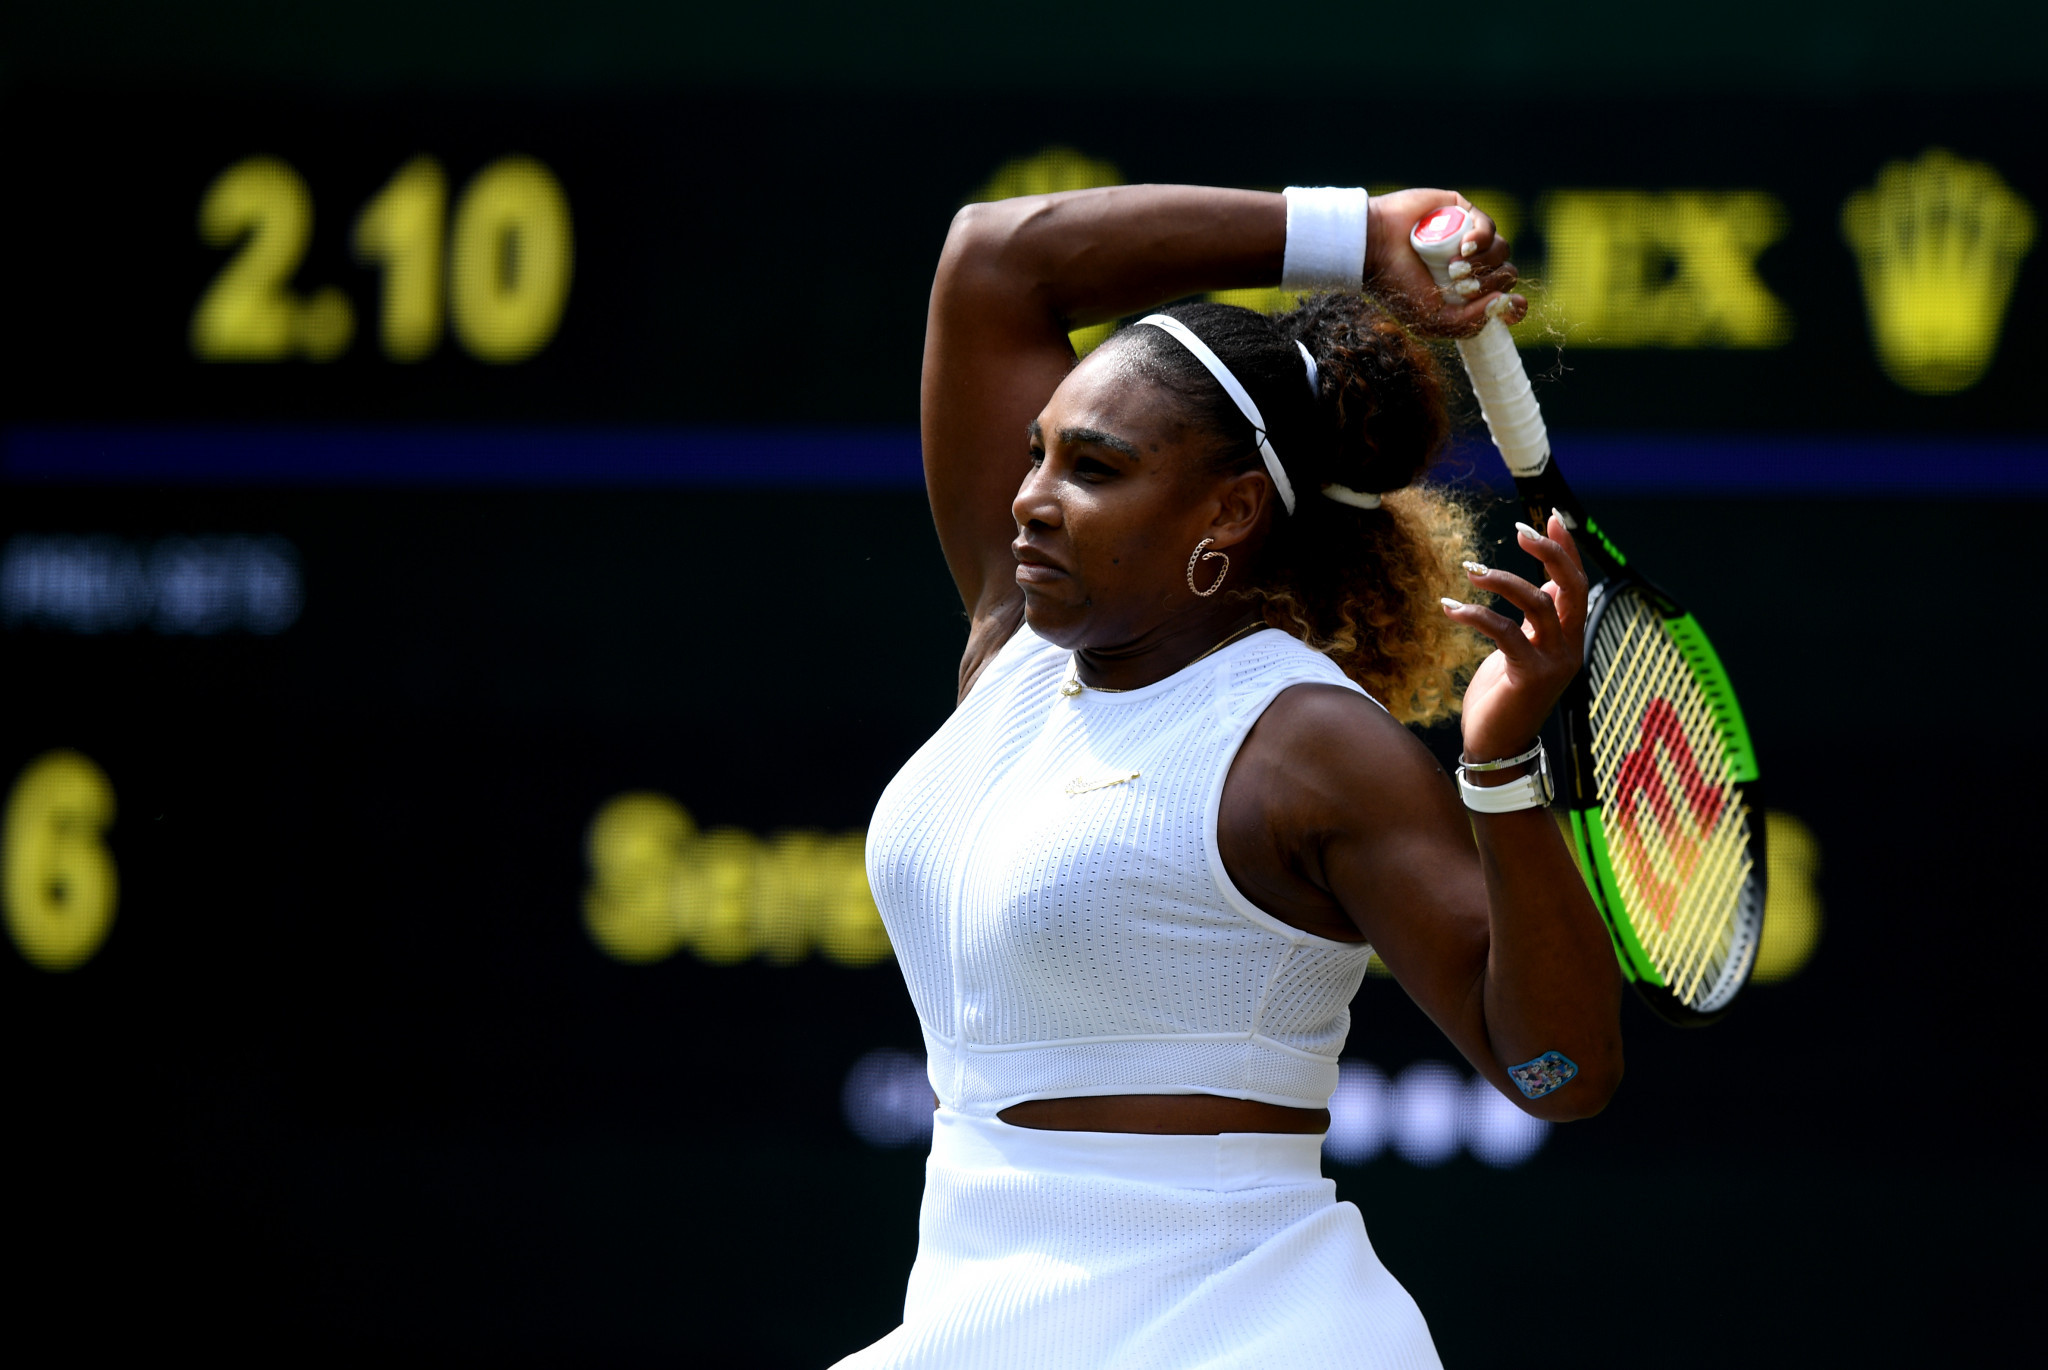 Seven-times Wimbledon champion Serena Williams cruised into the quarter-finals with victory over Spain's Carla Suárez Navarro ©Getty Images